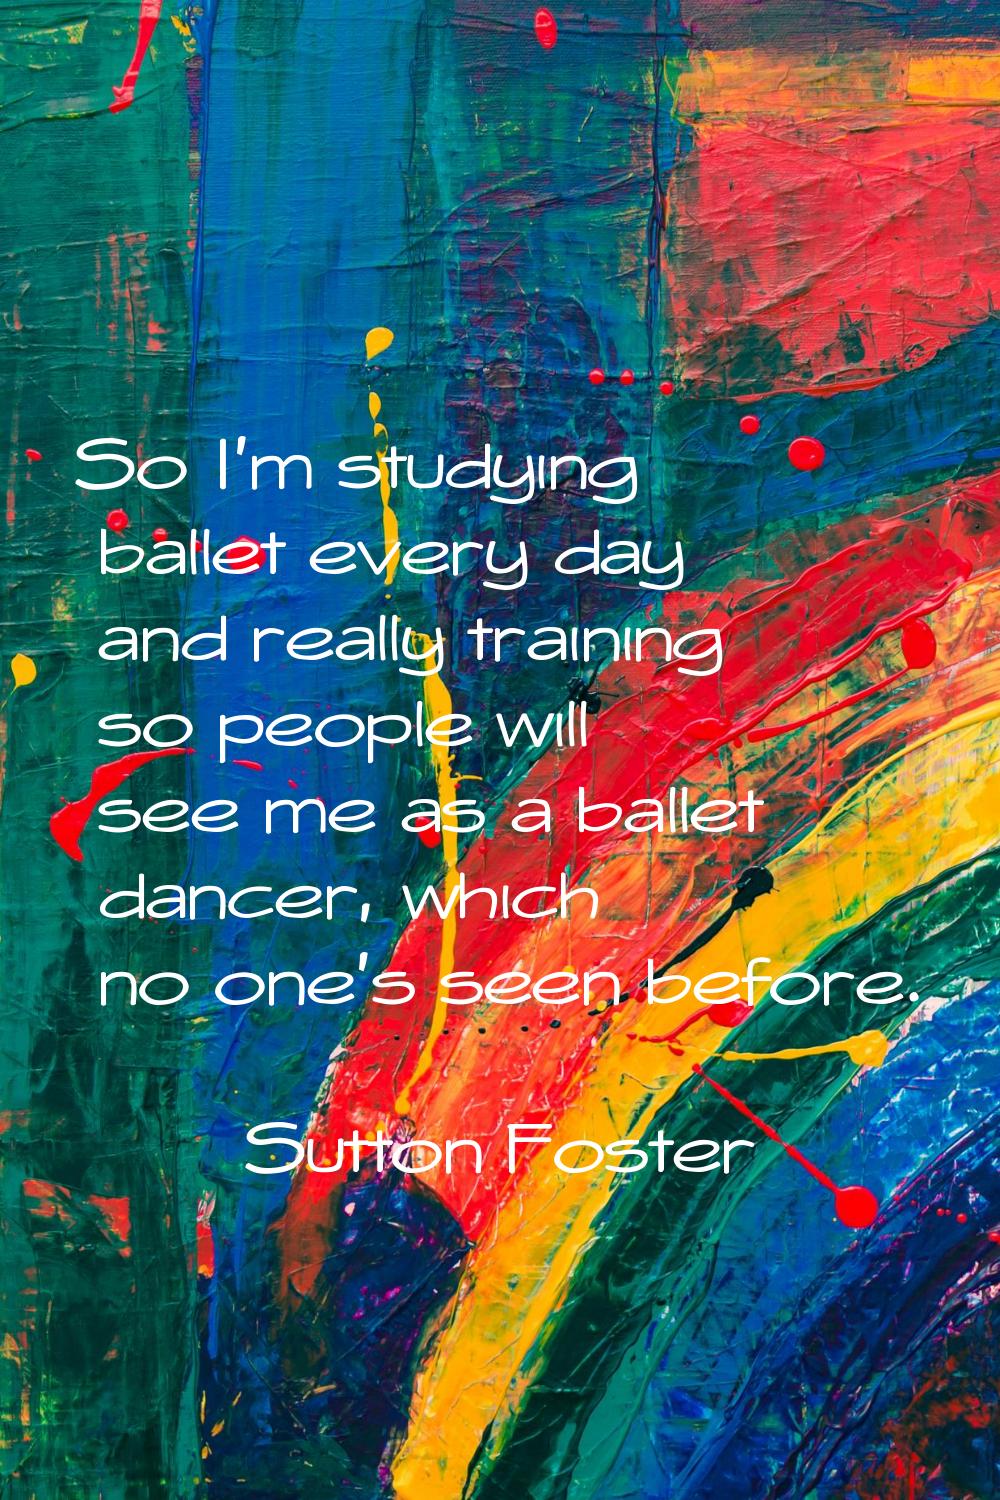 So I'm studying ballet every day and really training so people will see me as a ballet dancer, whic